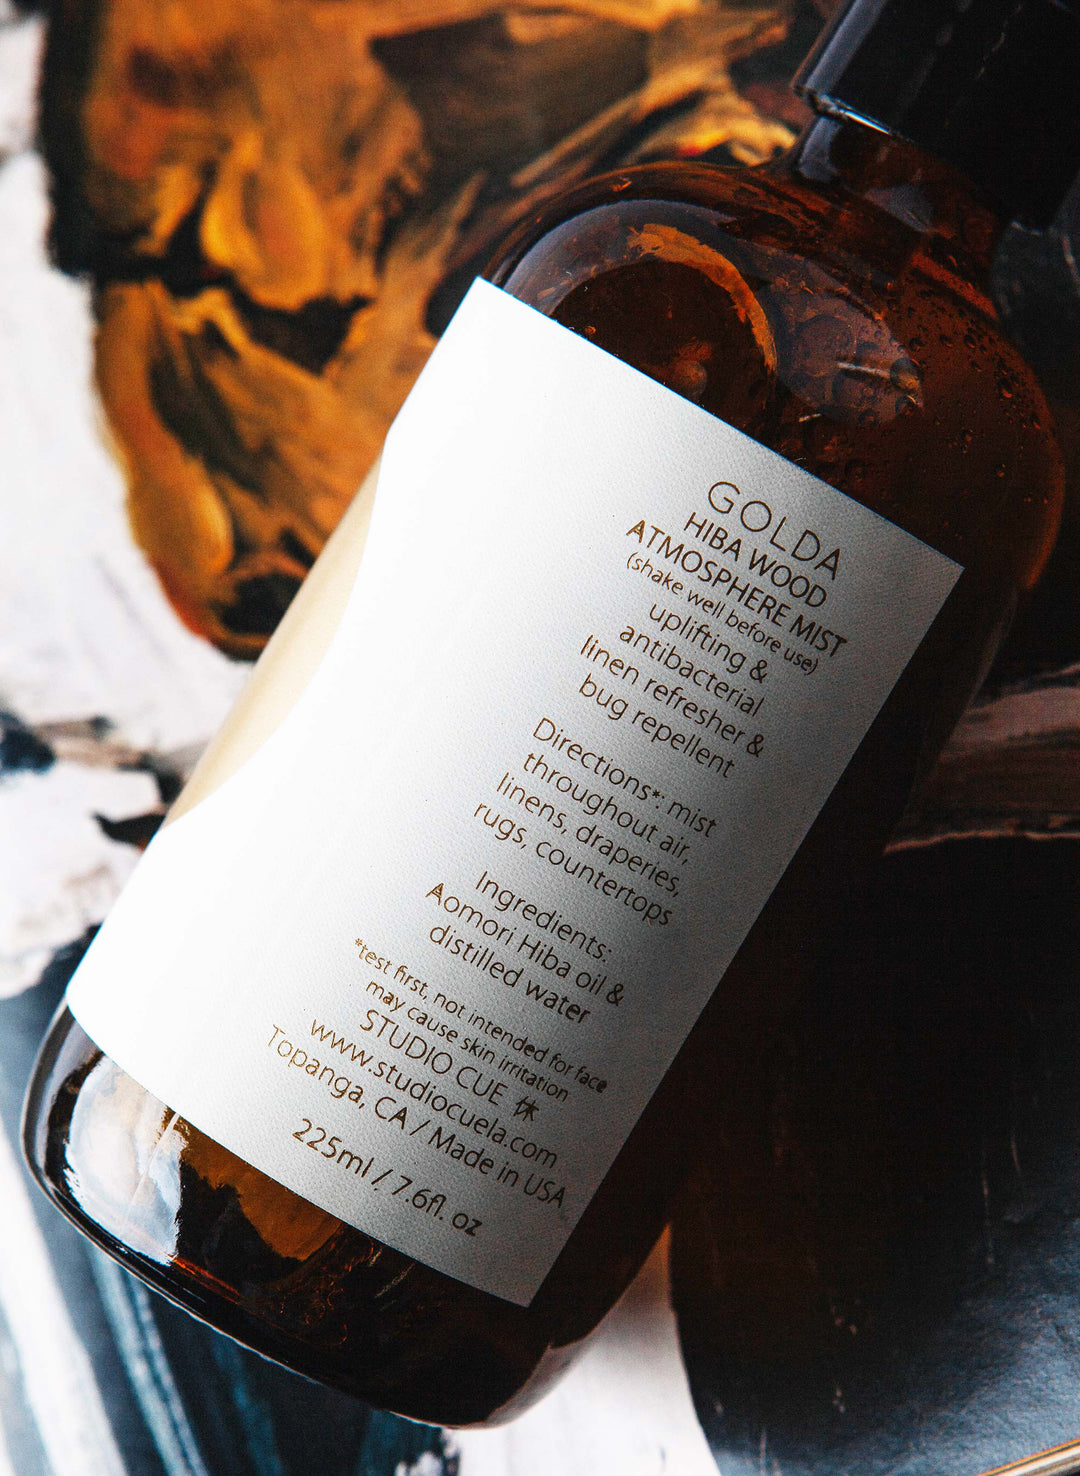 a brown bottle with white label